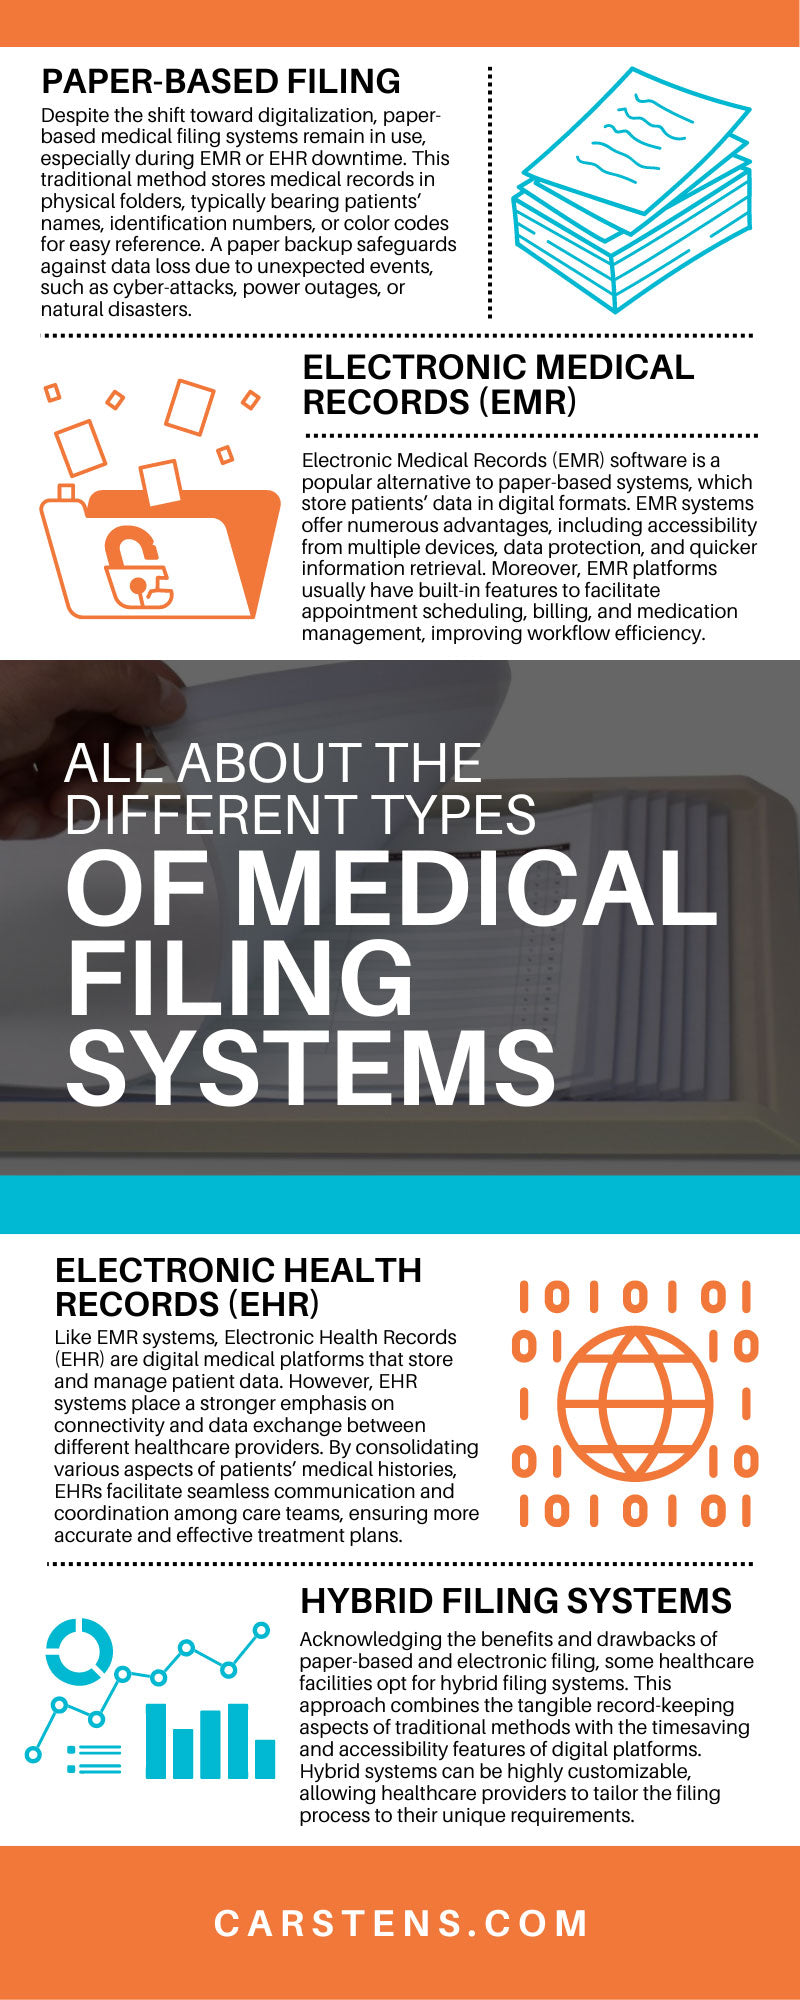 All About the Different Types of Medical Filing Systems